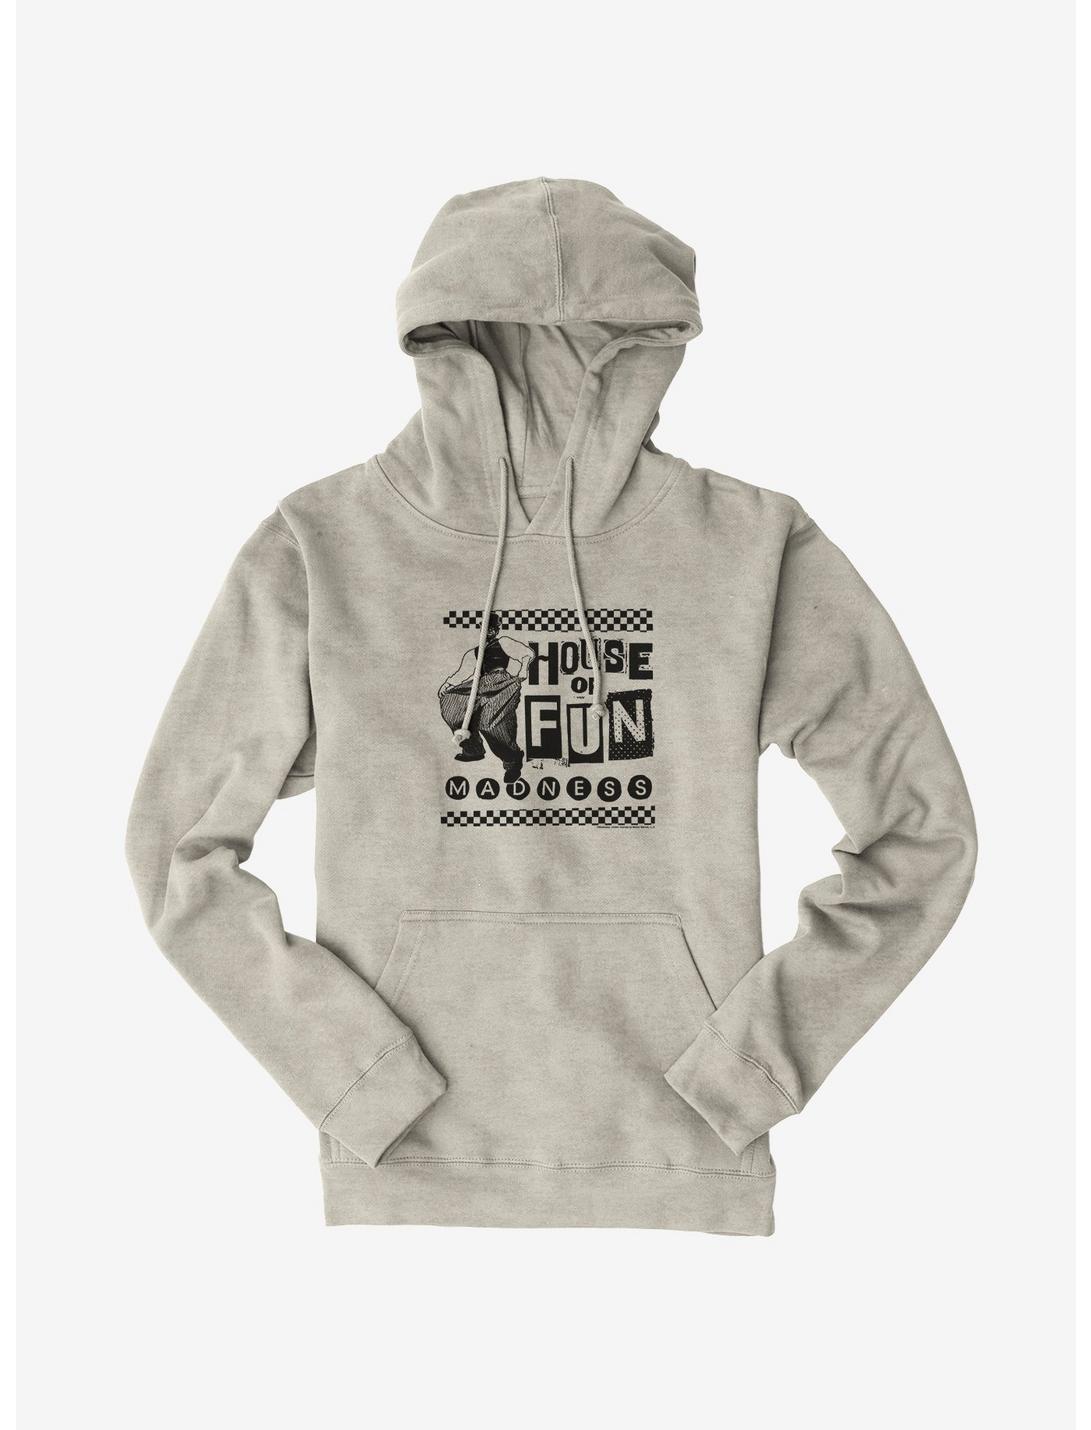 Madness House Of Fun Hoodie, OATMEAL HEATHER, hi-res